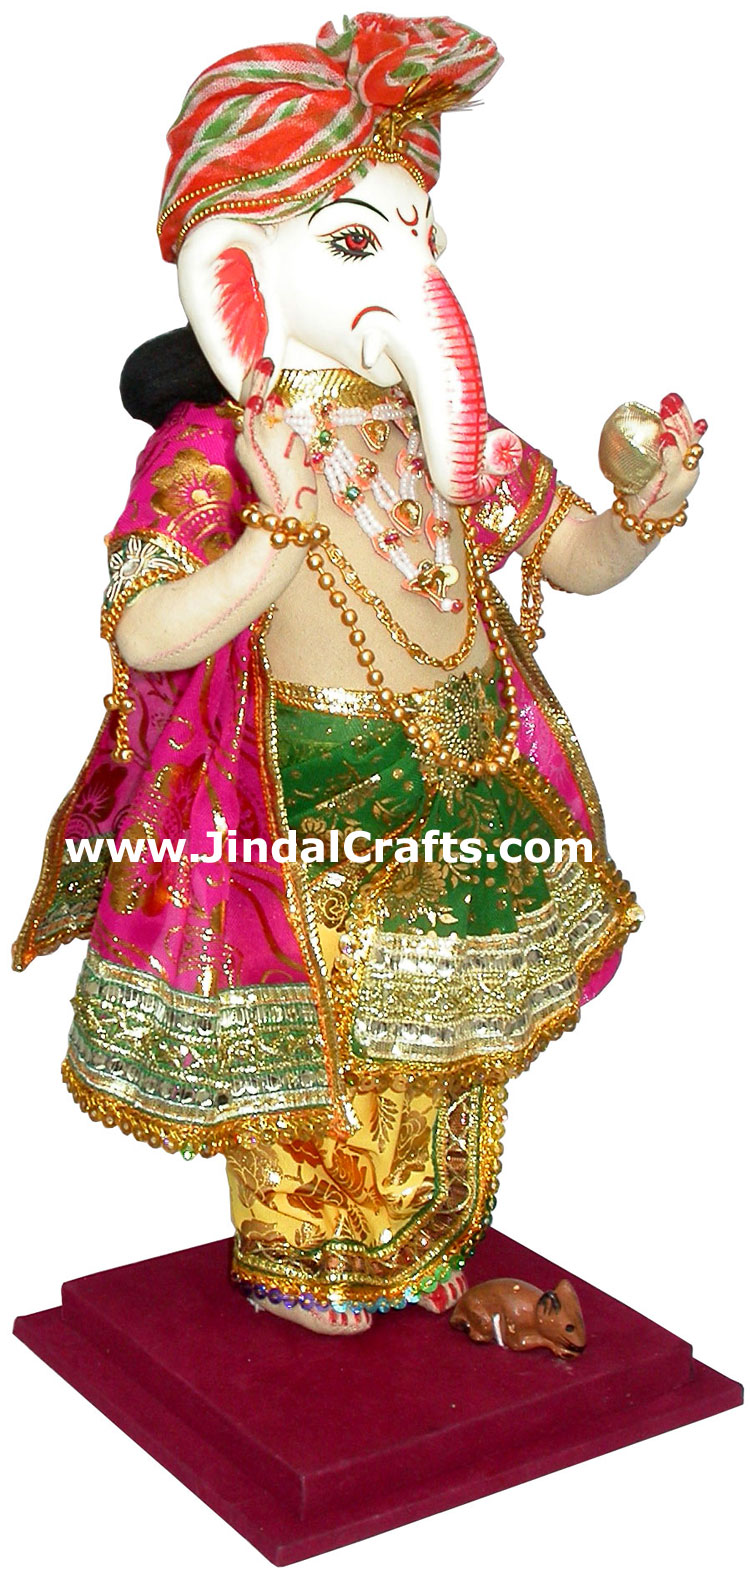 Lord Ganesha Handmade Traditional Indian Collectible Costume Doll Home Decor Art